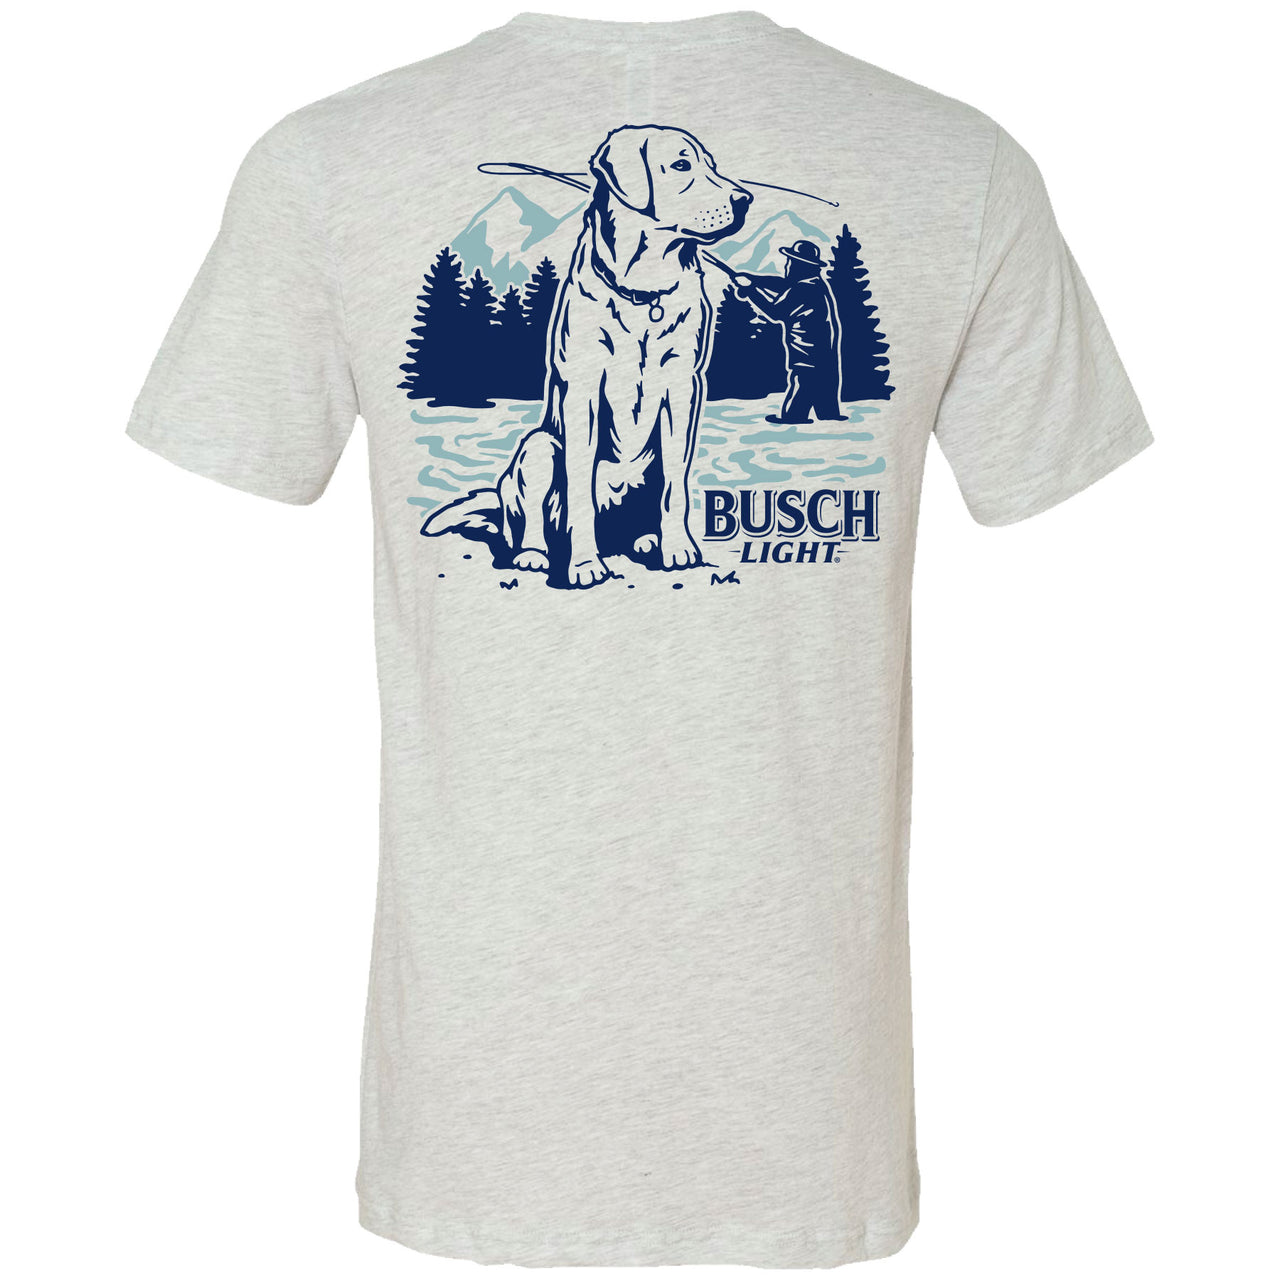 Busch Light - Fly Fishing with Dog scene - 2-sided T-shirt